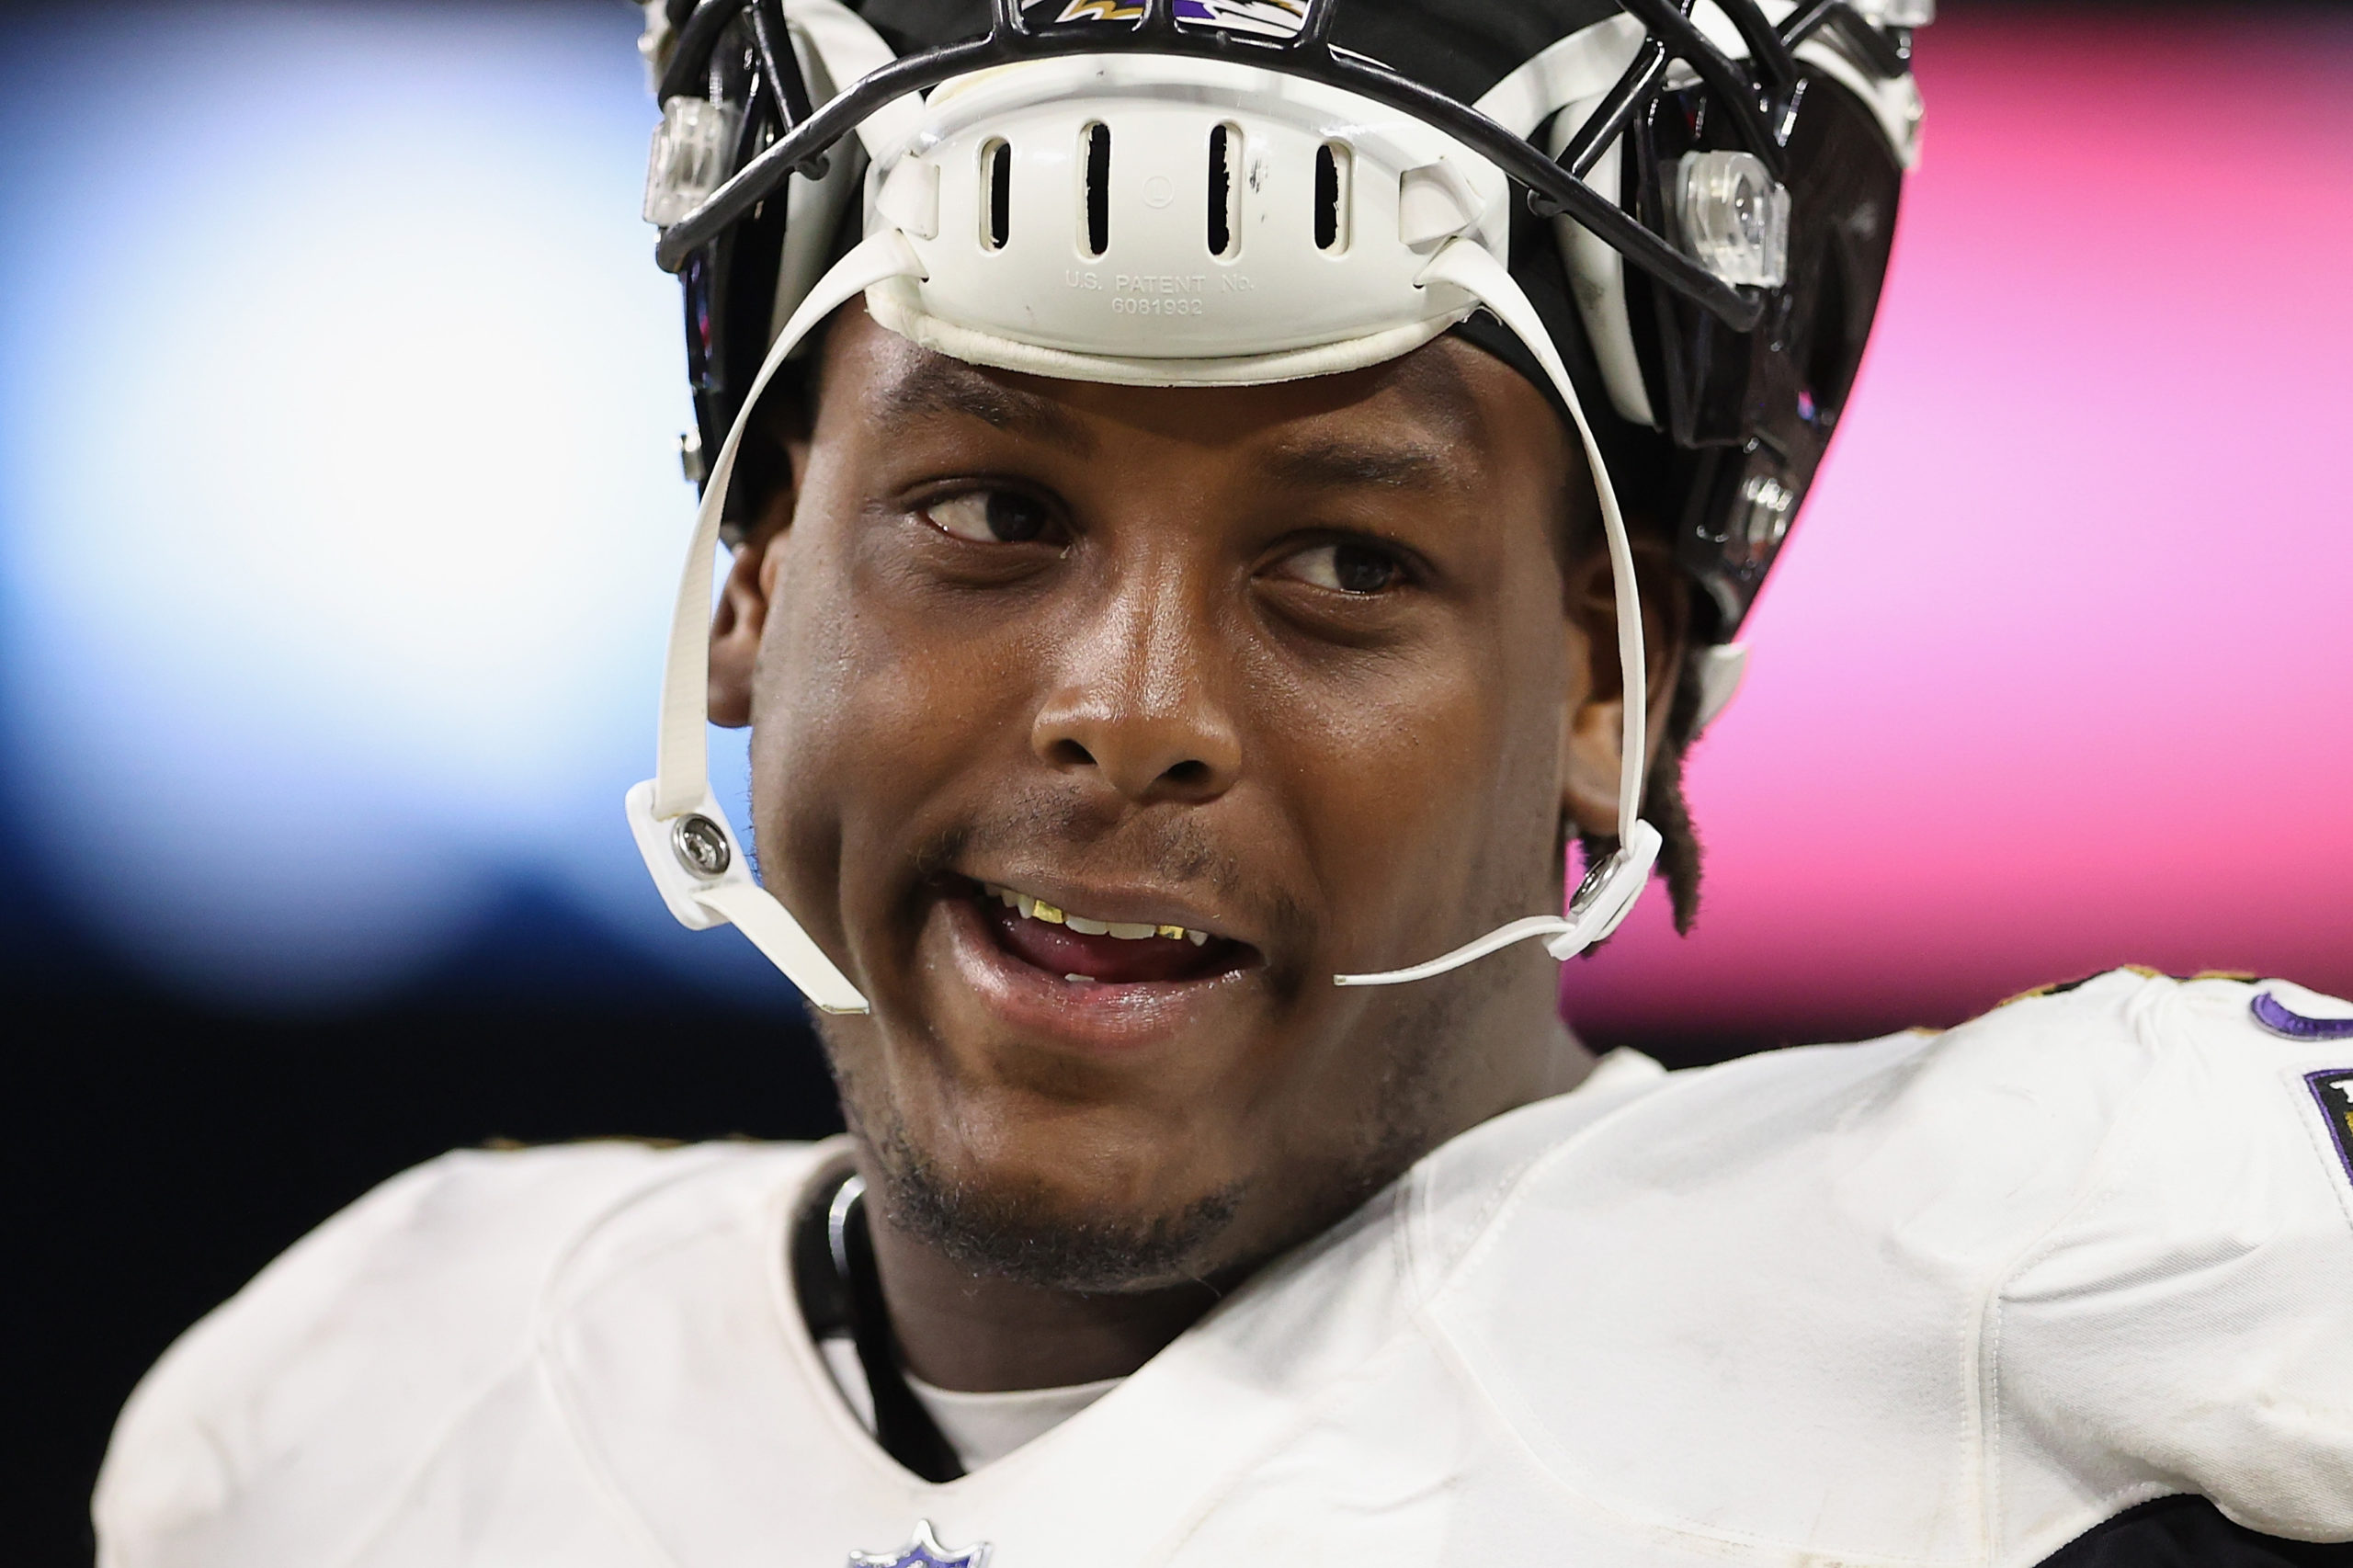 Linebacker Jaylon Ferguson of the Baltimore Ravens is seen on the sidelines during an NFL game in September. The team announced news of Ferguson's death at age 26, but the cause of death has not been revealed.